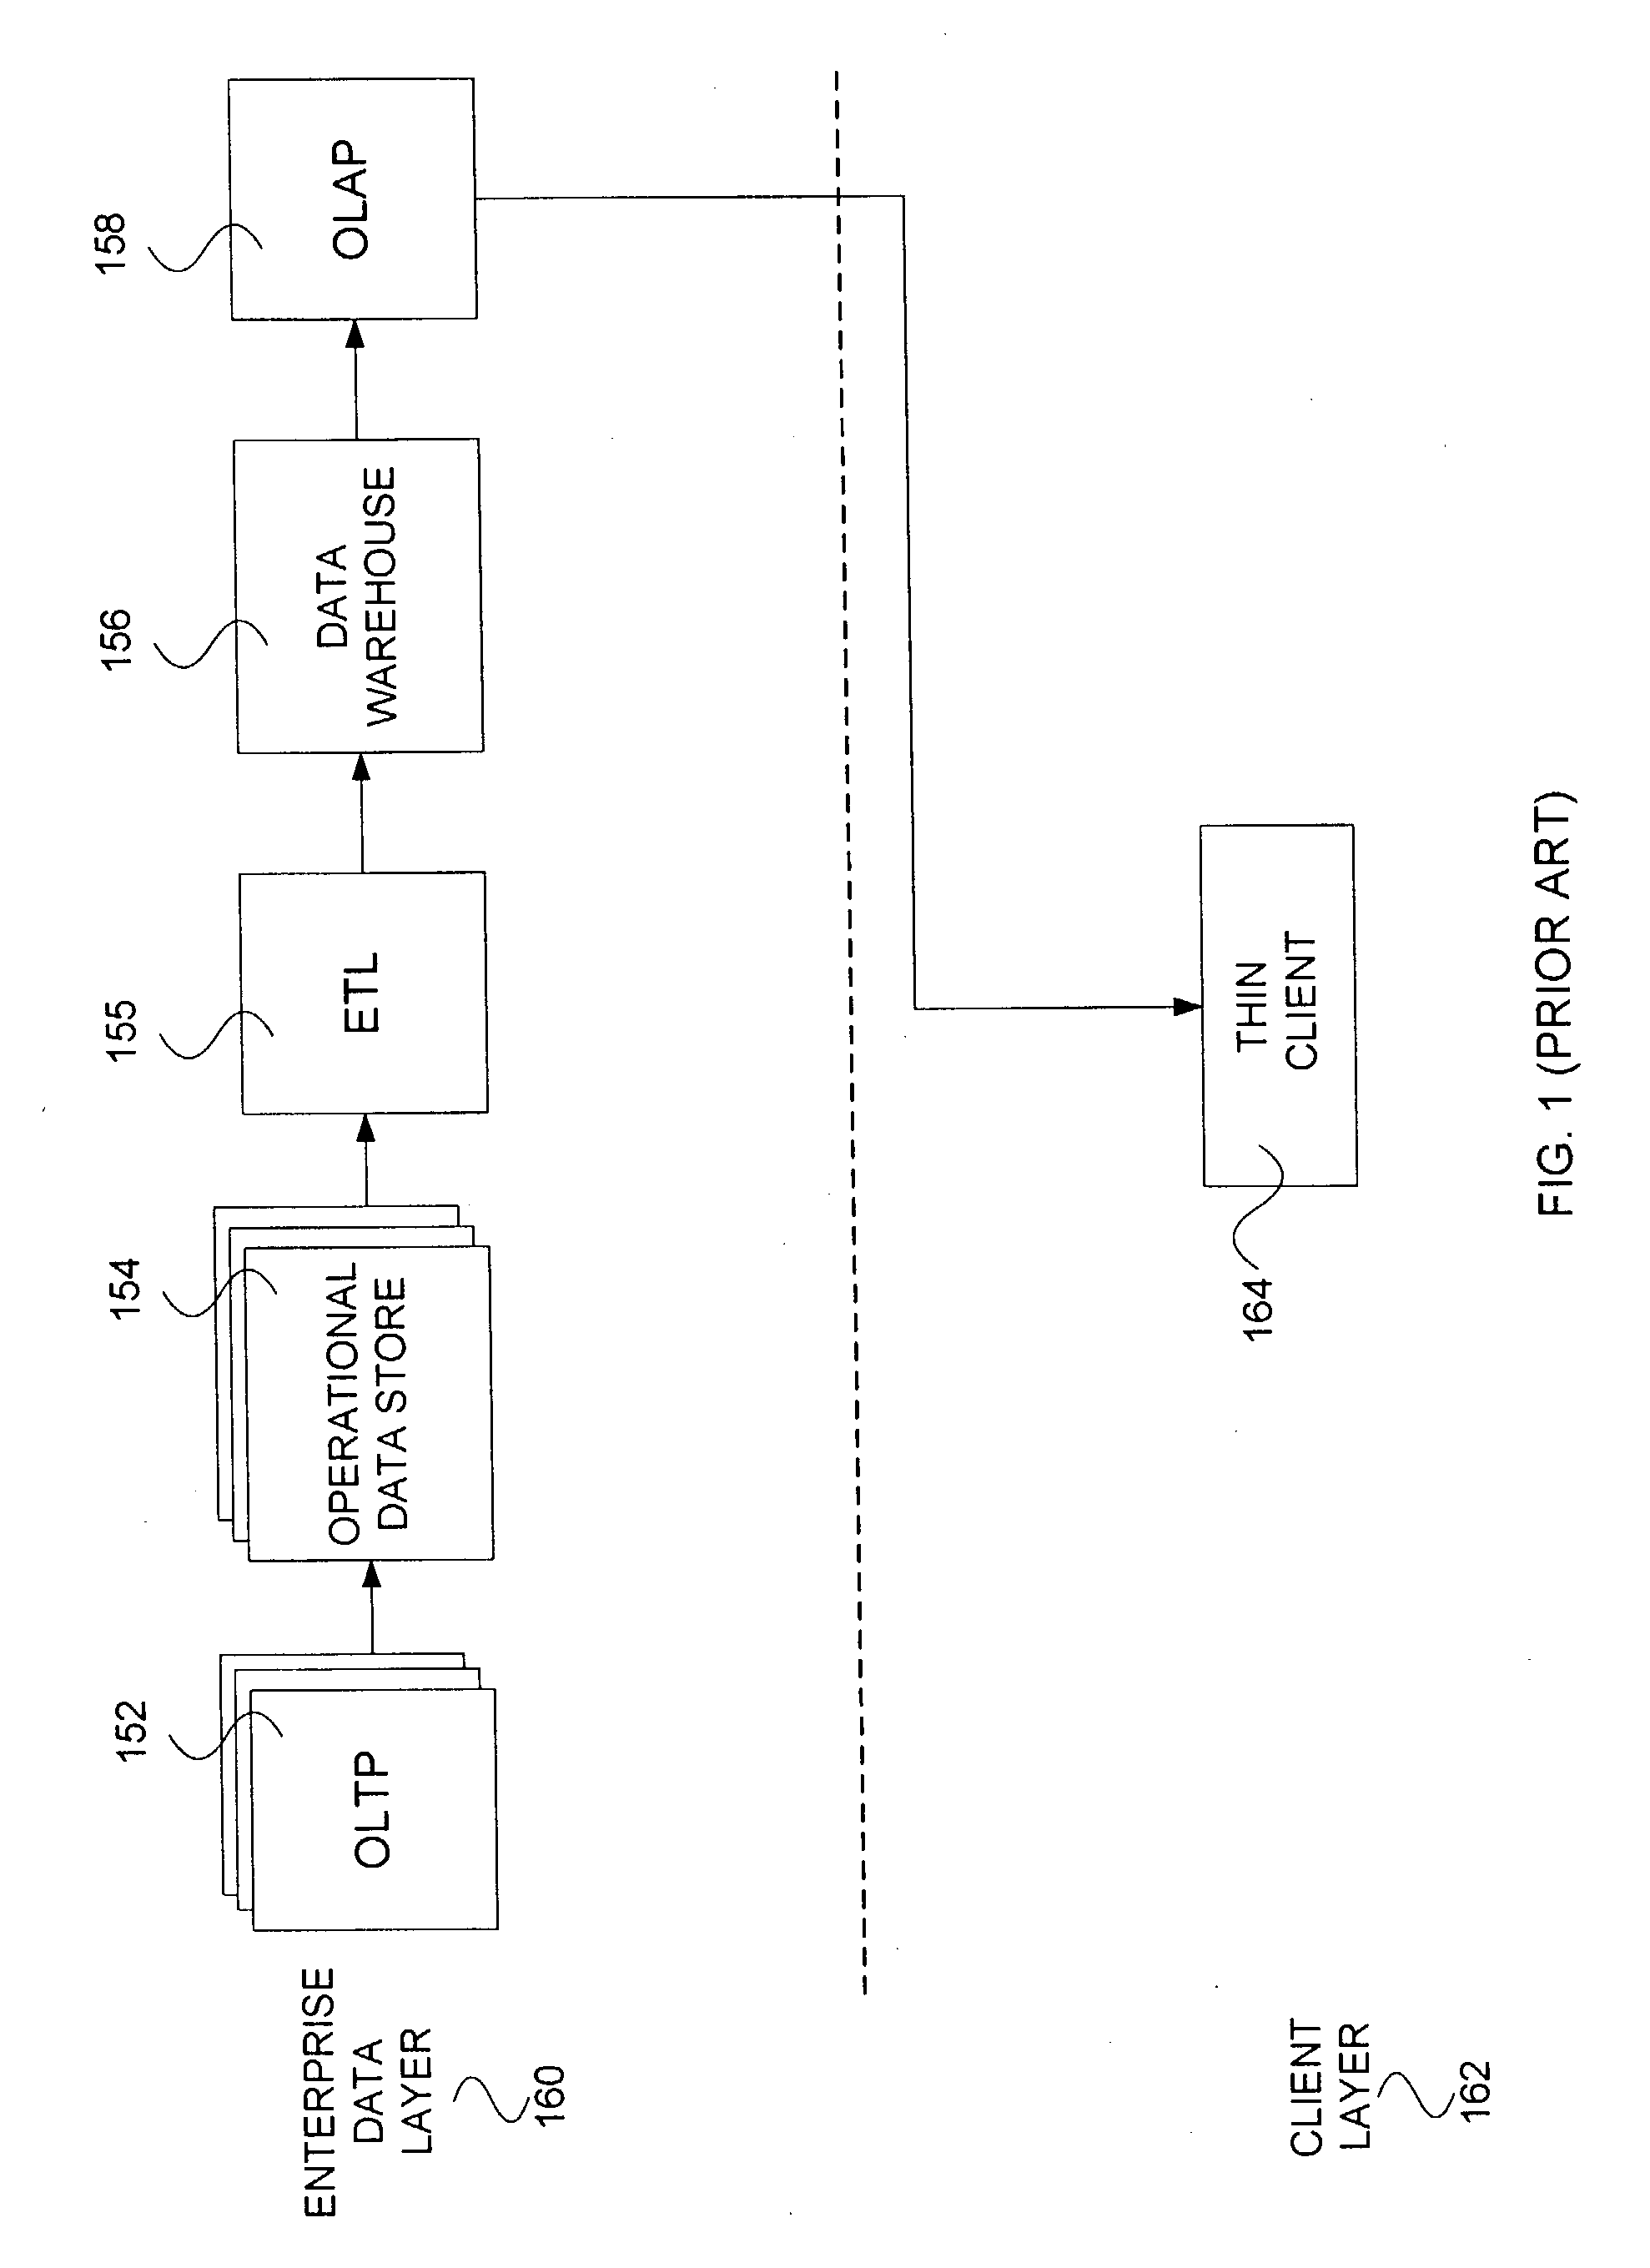 Method and apparatus for distributed rule evaluation in a near real-time business intelligence system